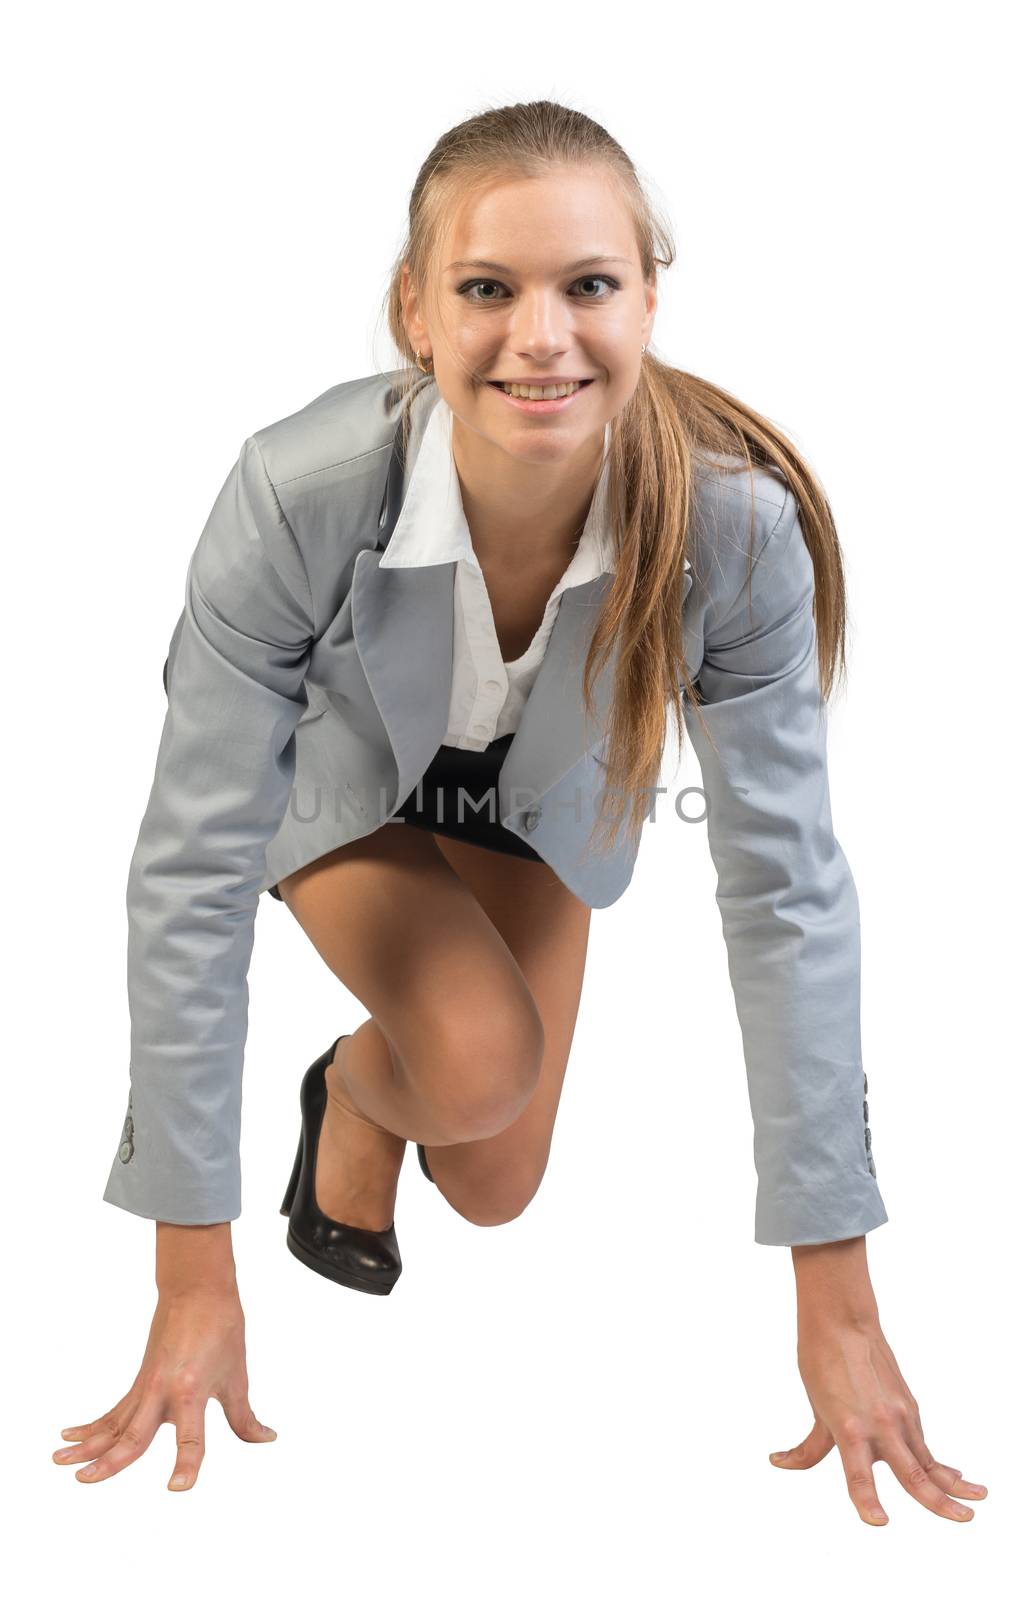 Businesswoman standing in running start pose, smiling, front view, Isolated over white background